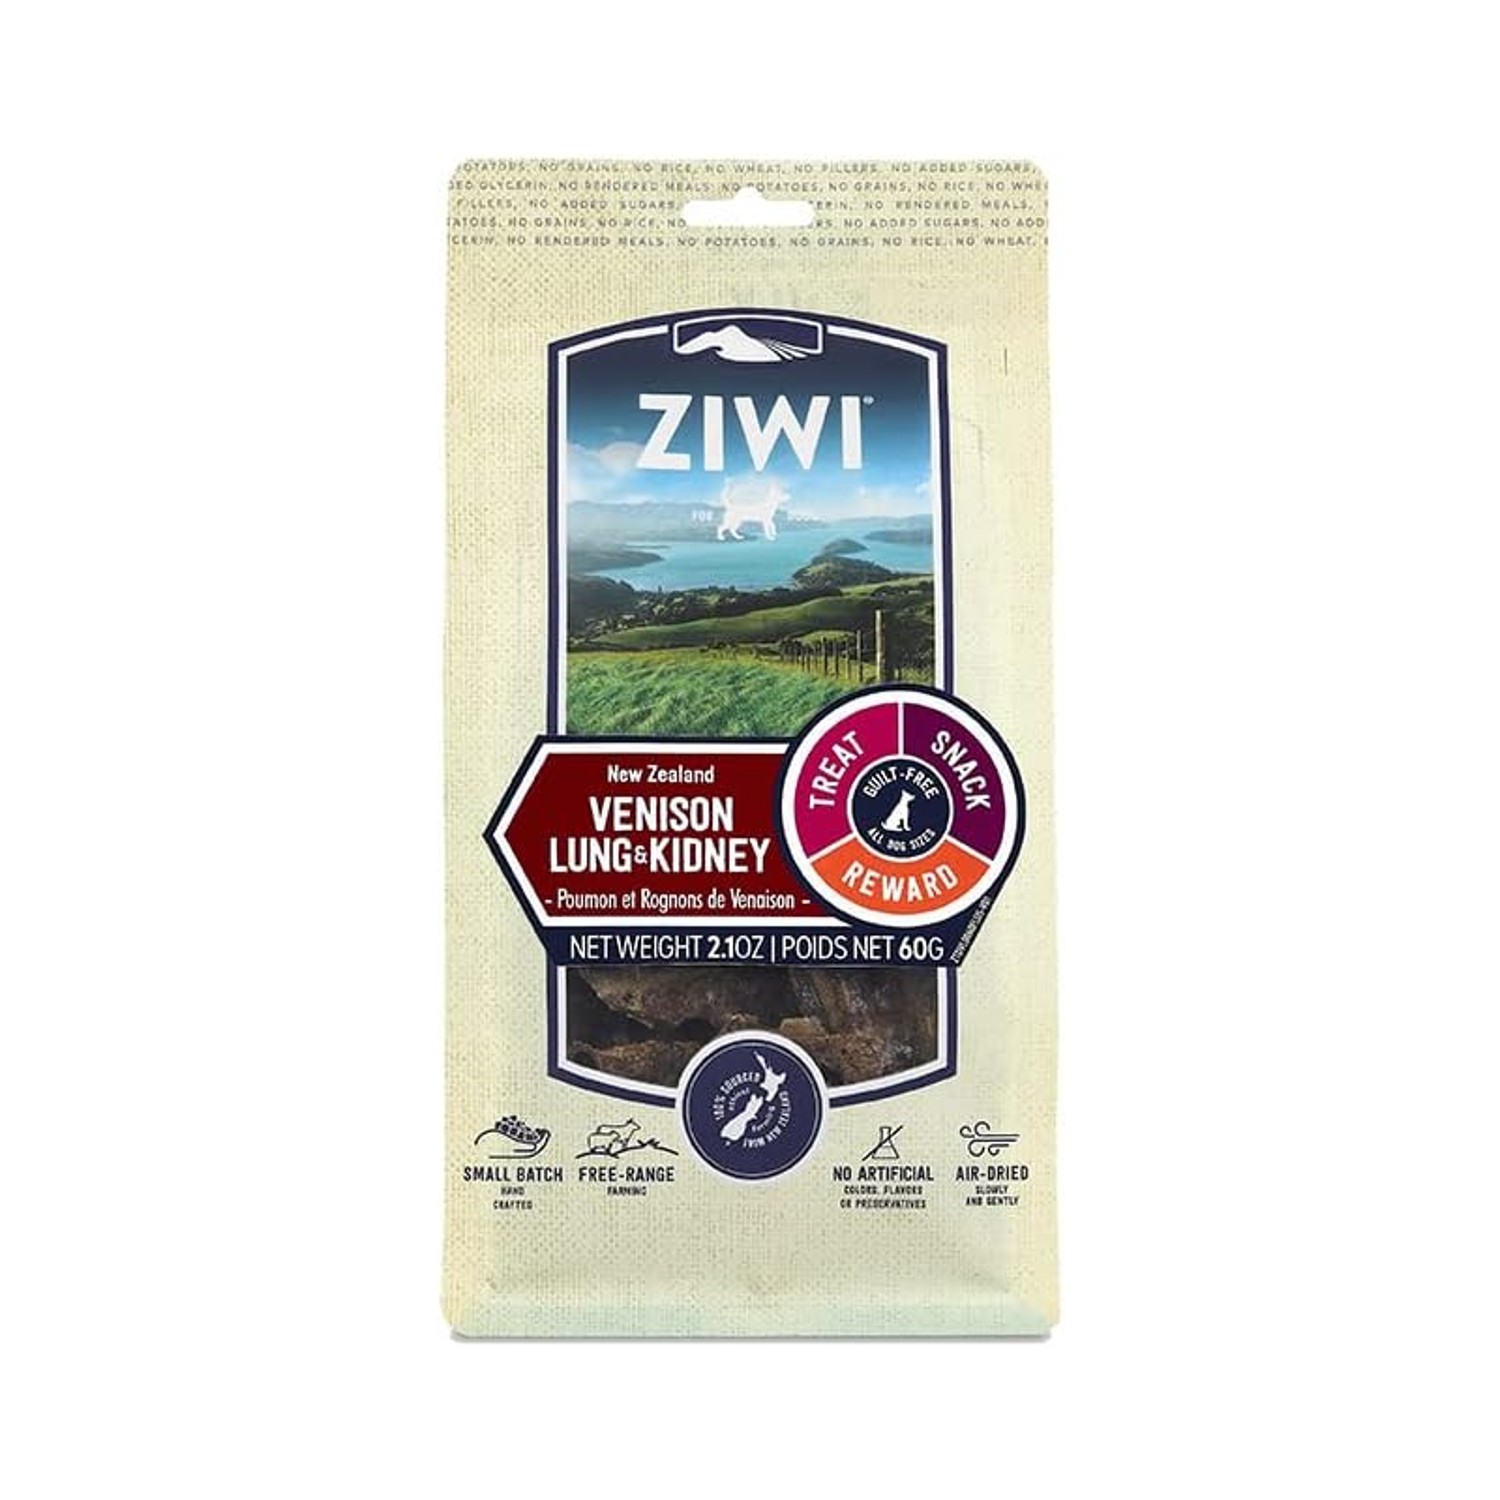 ZIWI All Natural Air-Dried Grain-free Chew Dog Treats - Venison Lung & Kidney